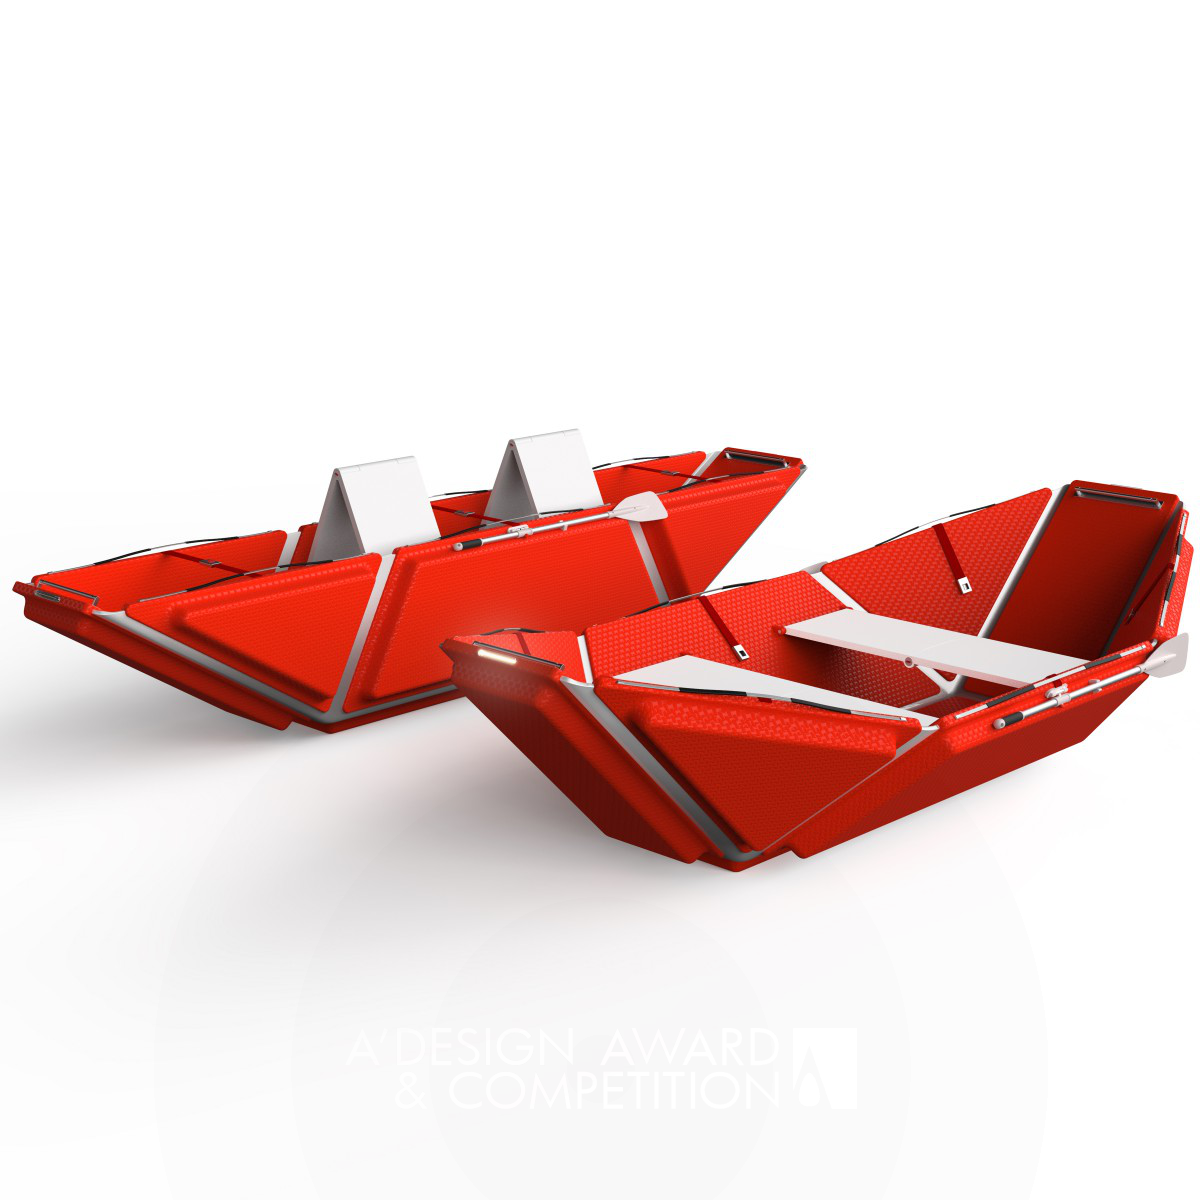 Fold and Rescue Paper Folding Lifeboat by Yining Chen